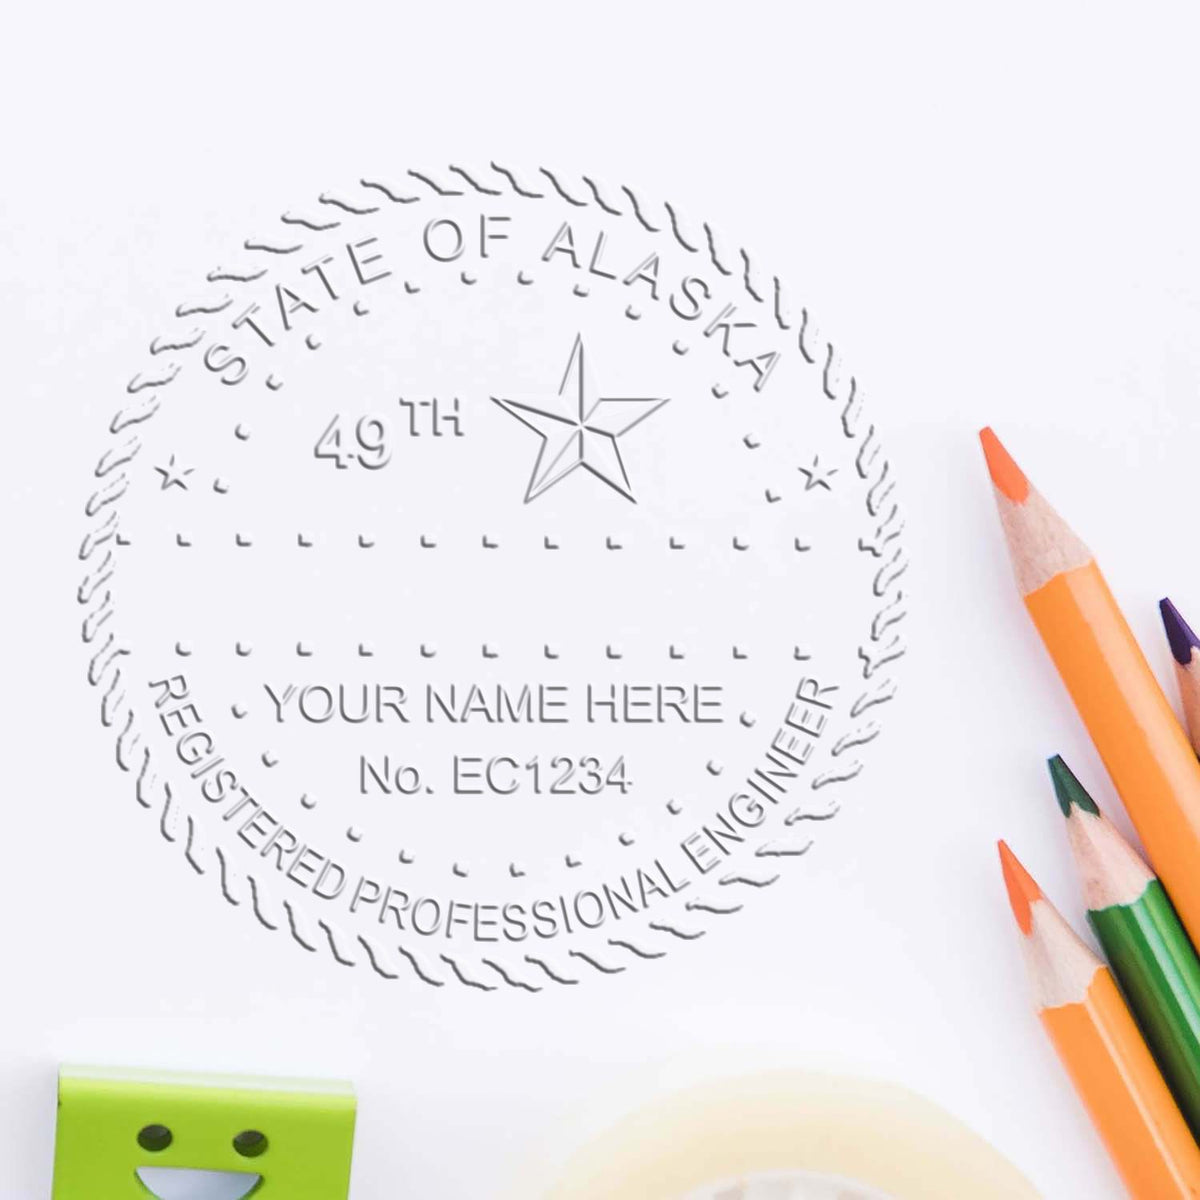 The Gift Alaska Engineer Seal stamp impression comes to life with a crisp, detailed image stamped on paper - showcasing true professional quality.